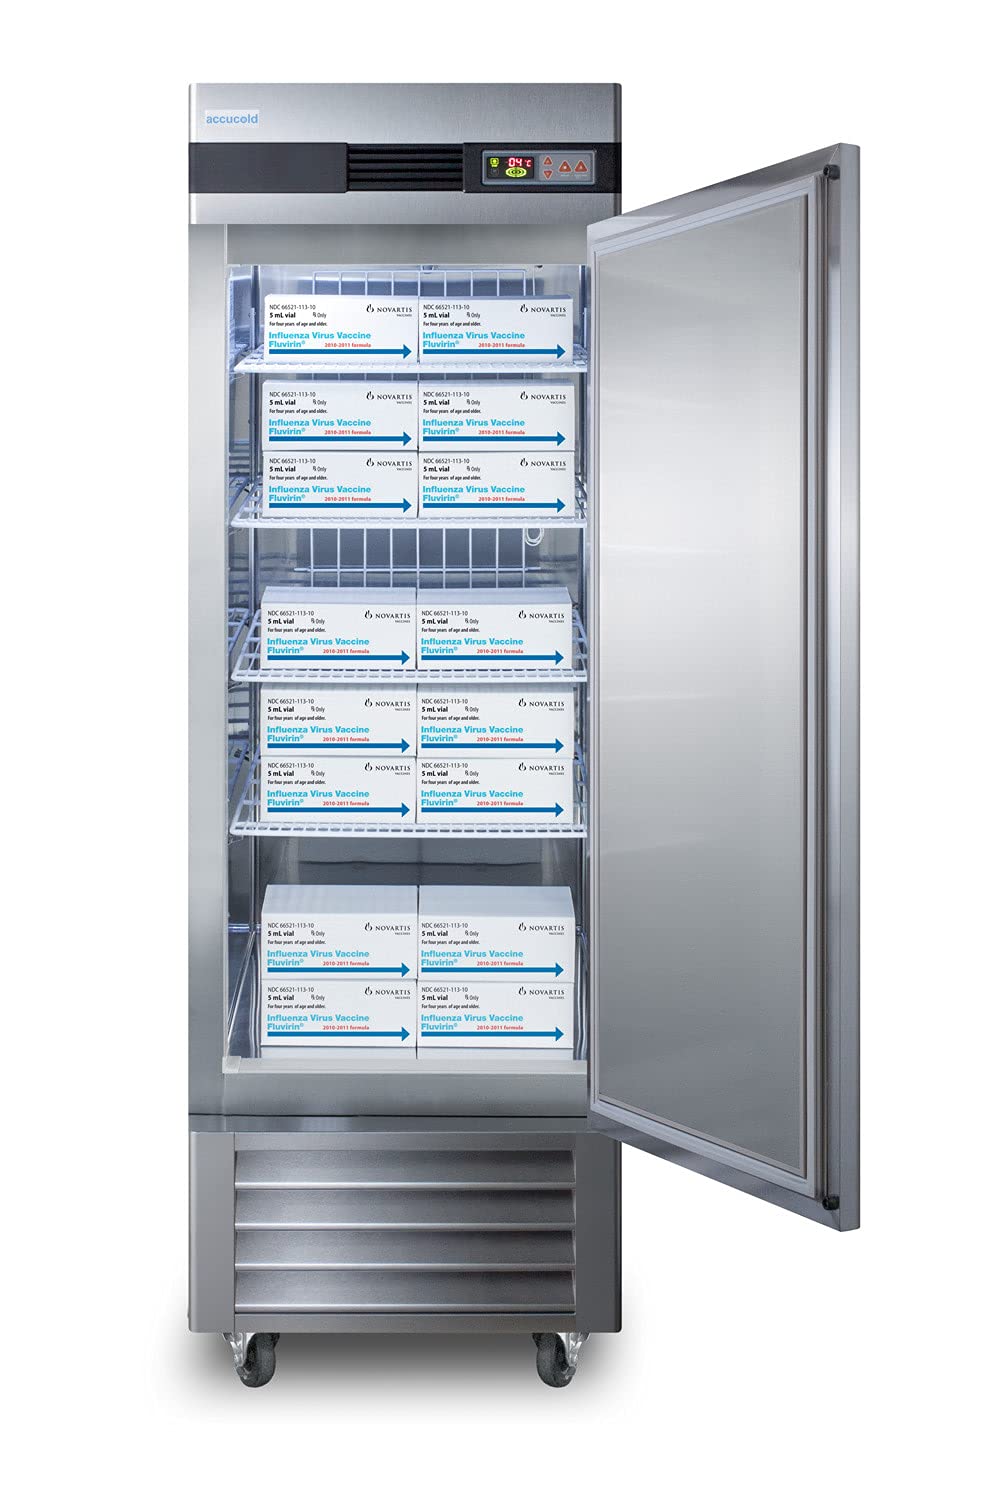 Summit Appliance ARS23ML Pharma-Vac Performance Series 23 Cu.Ft. Upright Pharmacy All-refrigerator in Stainless Steel with Automatic Defrost, Factory-installed Lock, Digital Thermostat